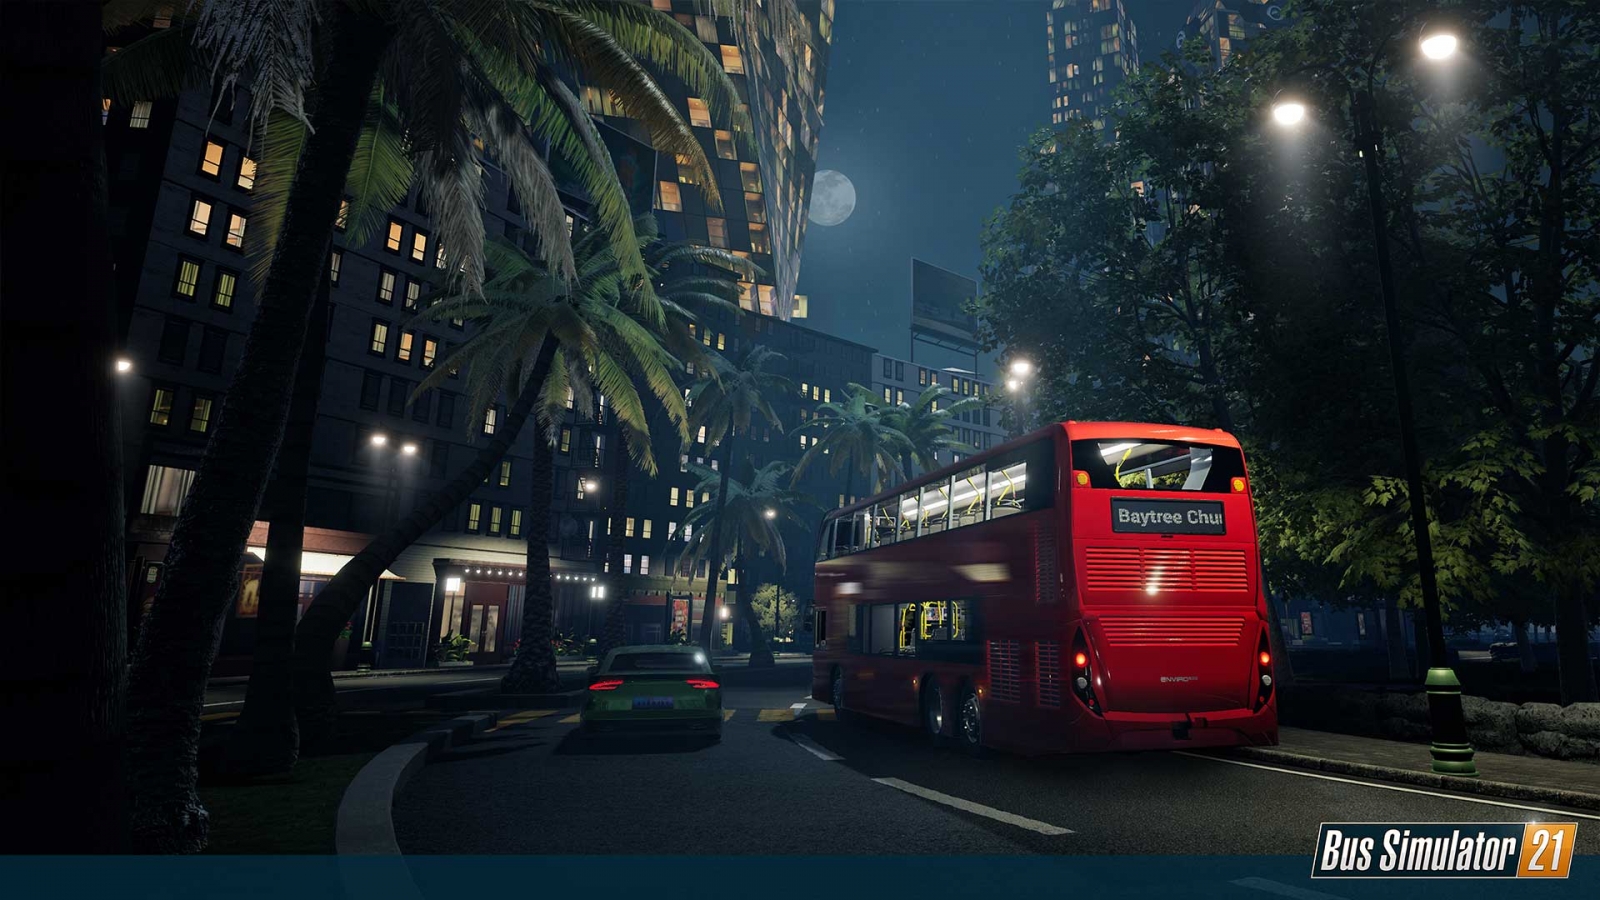 Bus Simulator 21 is now available on PC, Xbox One, and PS4, launch trailer  released — GAMINGTREND